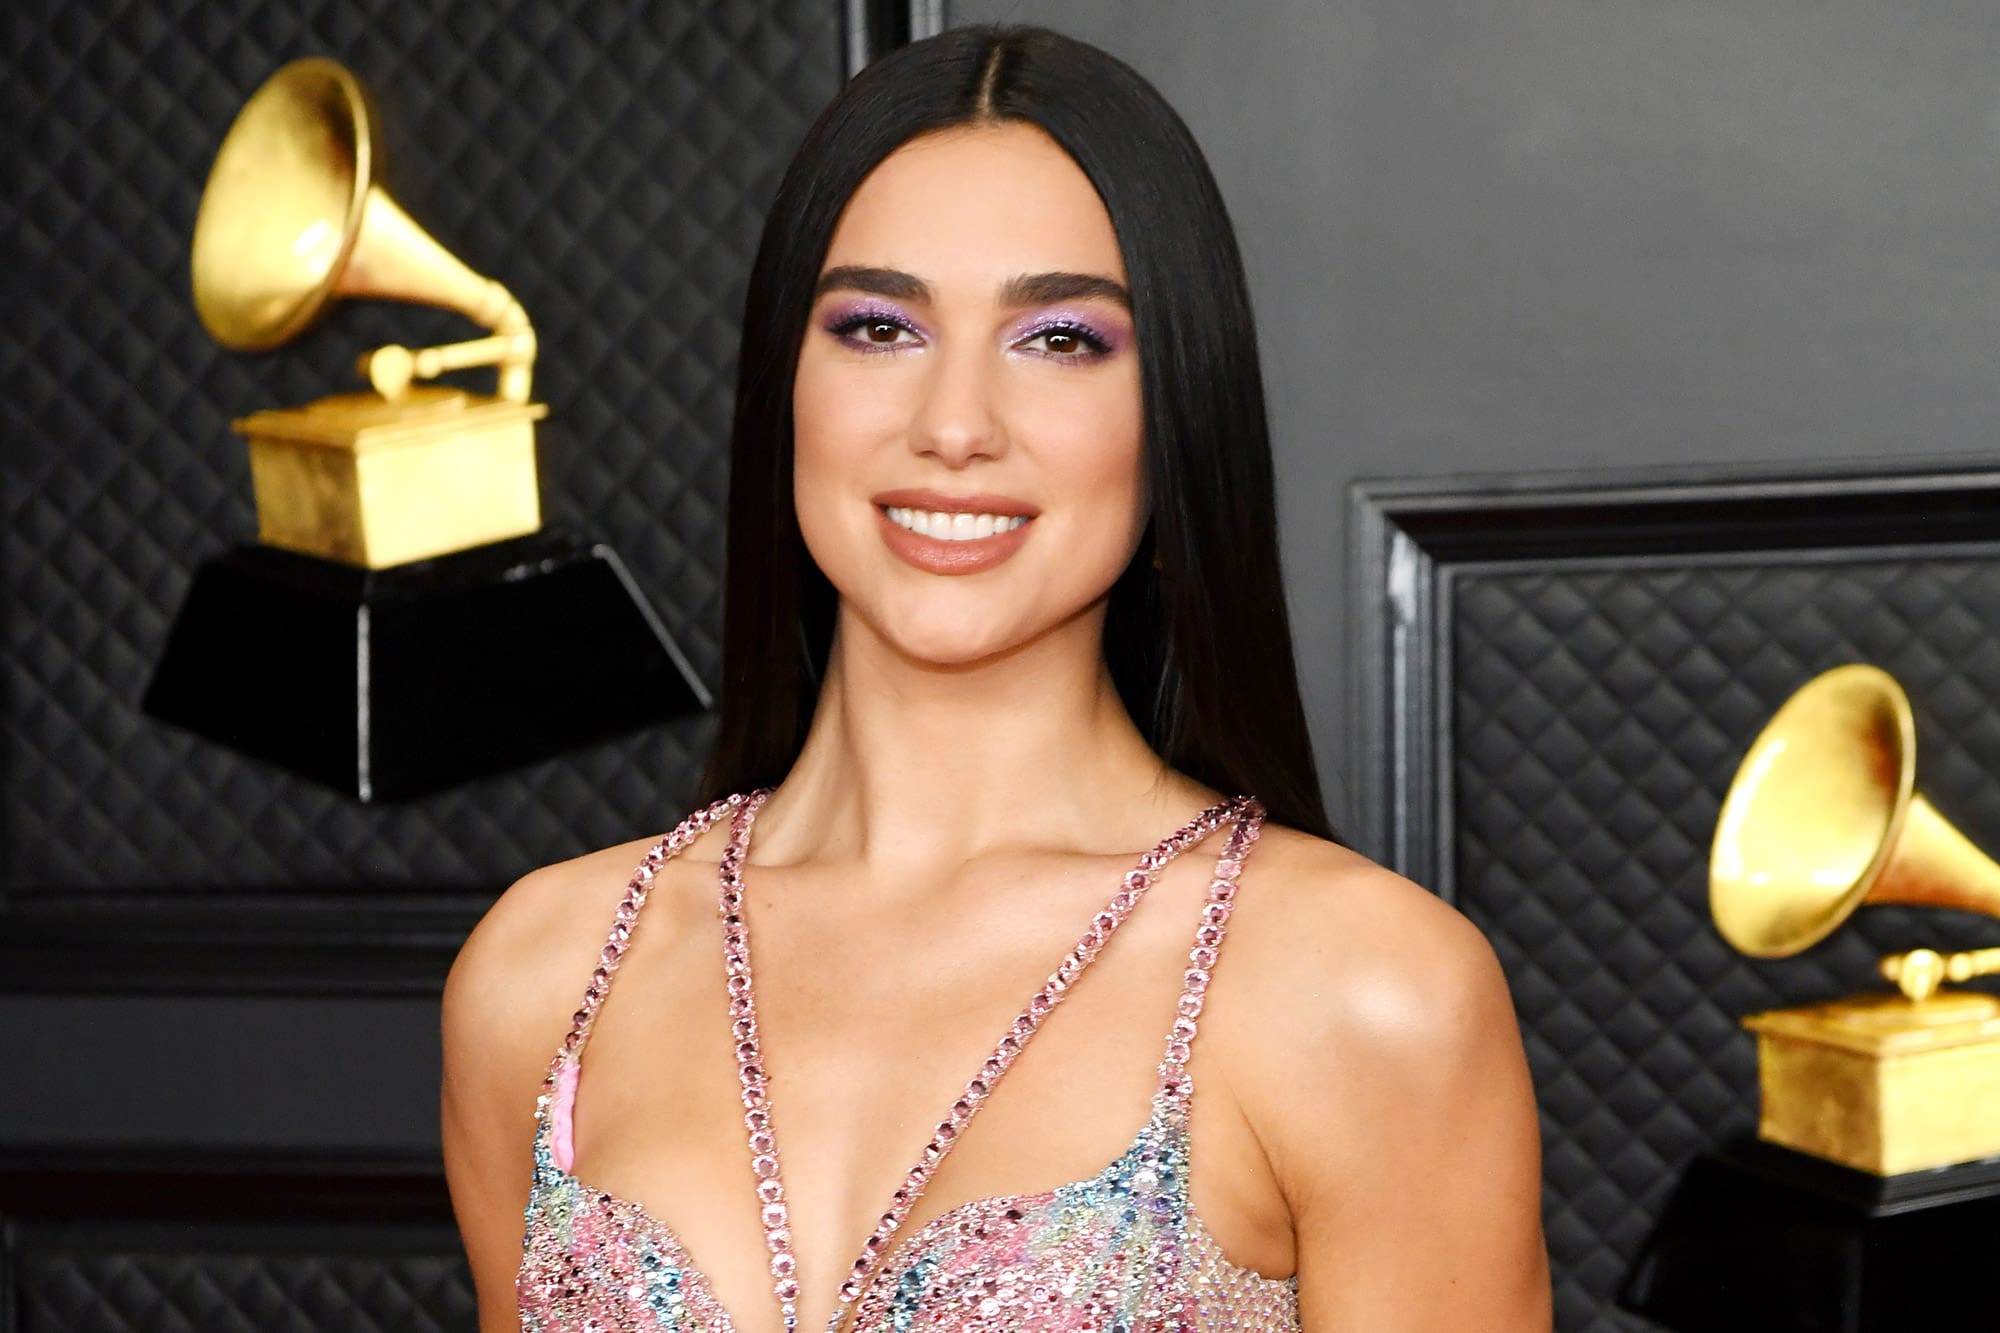 Dua Lipa Brings New Style Of Wedding Guest Attire With Sheer Slip And Thigh High Metalic Boots